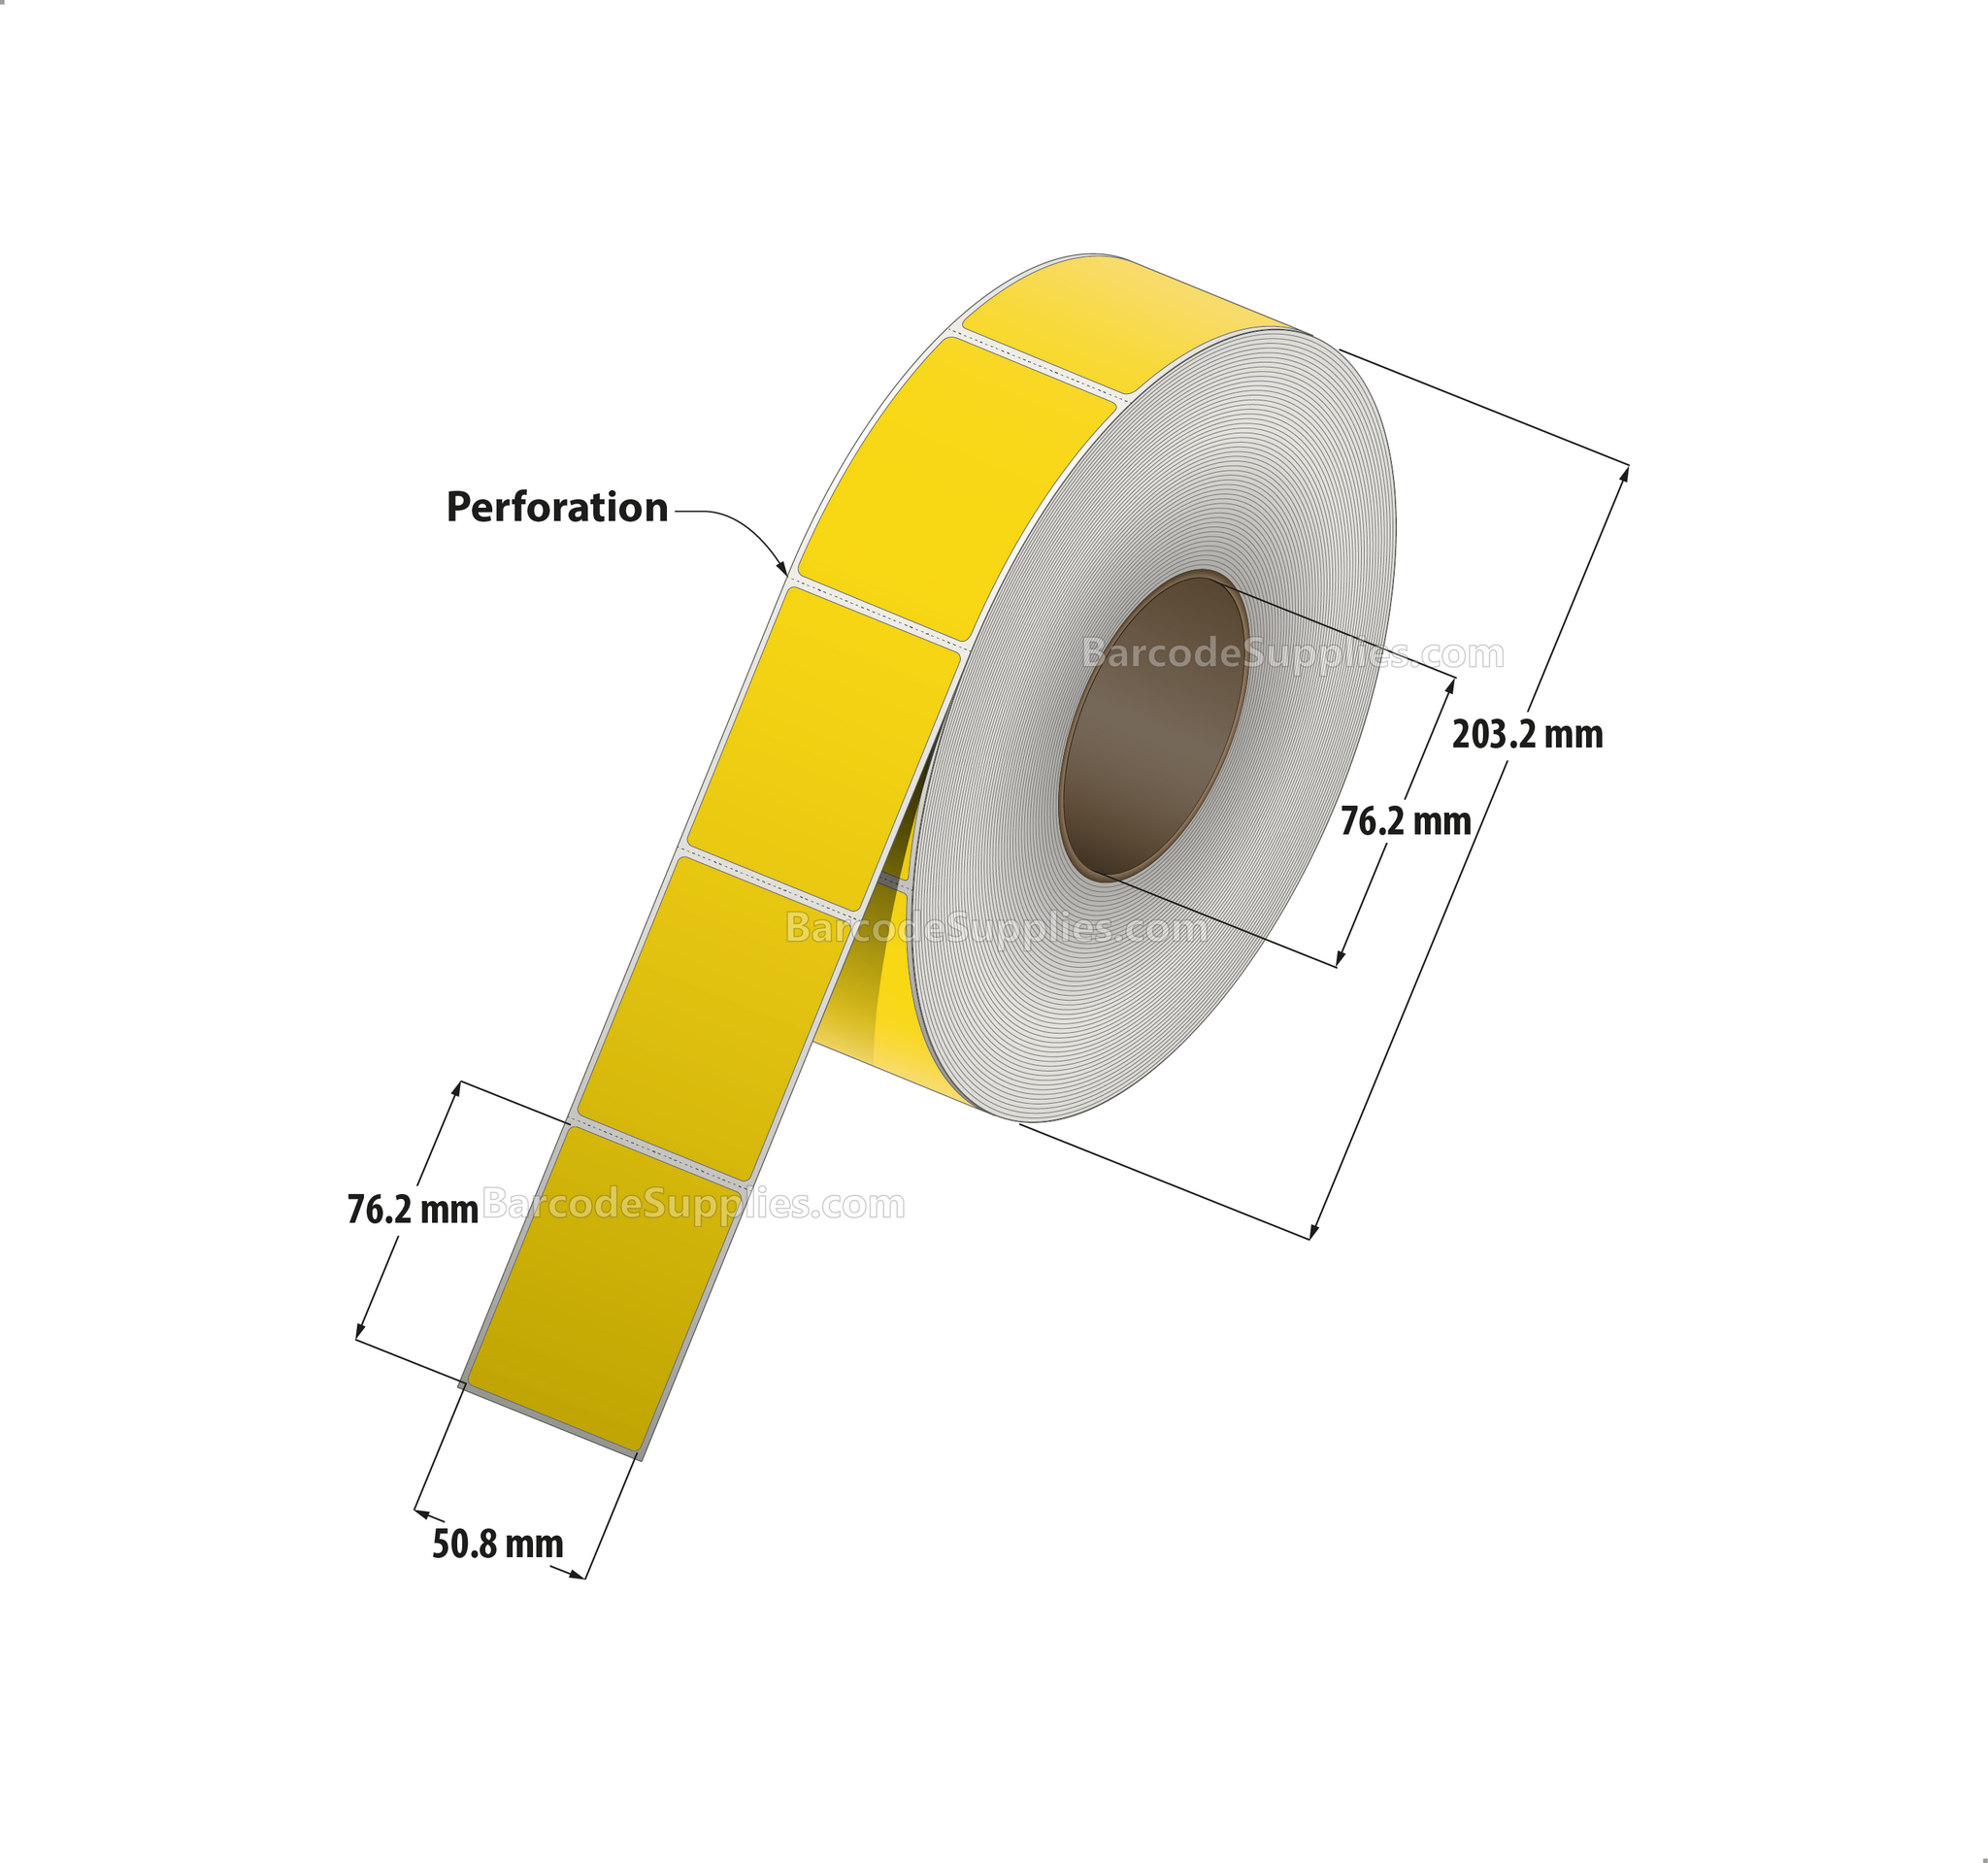 2 x 3 Thermal Transfer Pantone Yellow Labels With Permanent Adhesive - Perforated - 1900 Labels Per Roll - Carton Of 8 Rolls - 15200 Labels Total - MPN: RFC-2-3-1900-YL